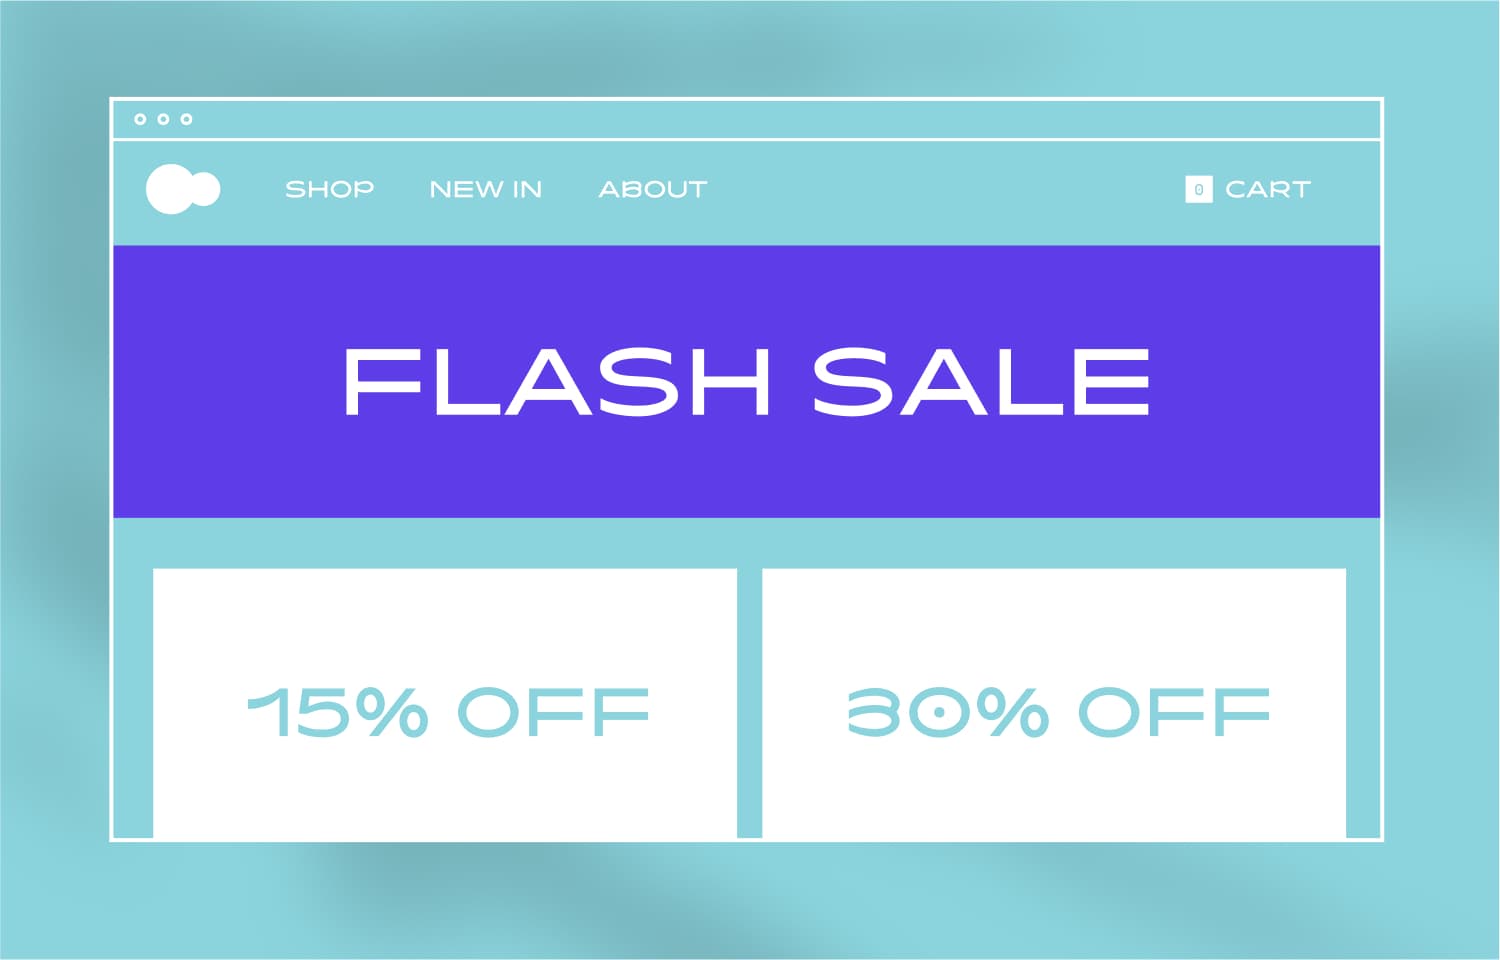 Inspiring Ecommerce Sales Promotion Examples to Try